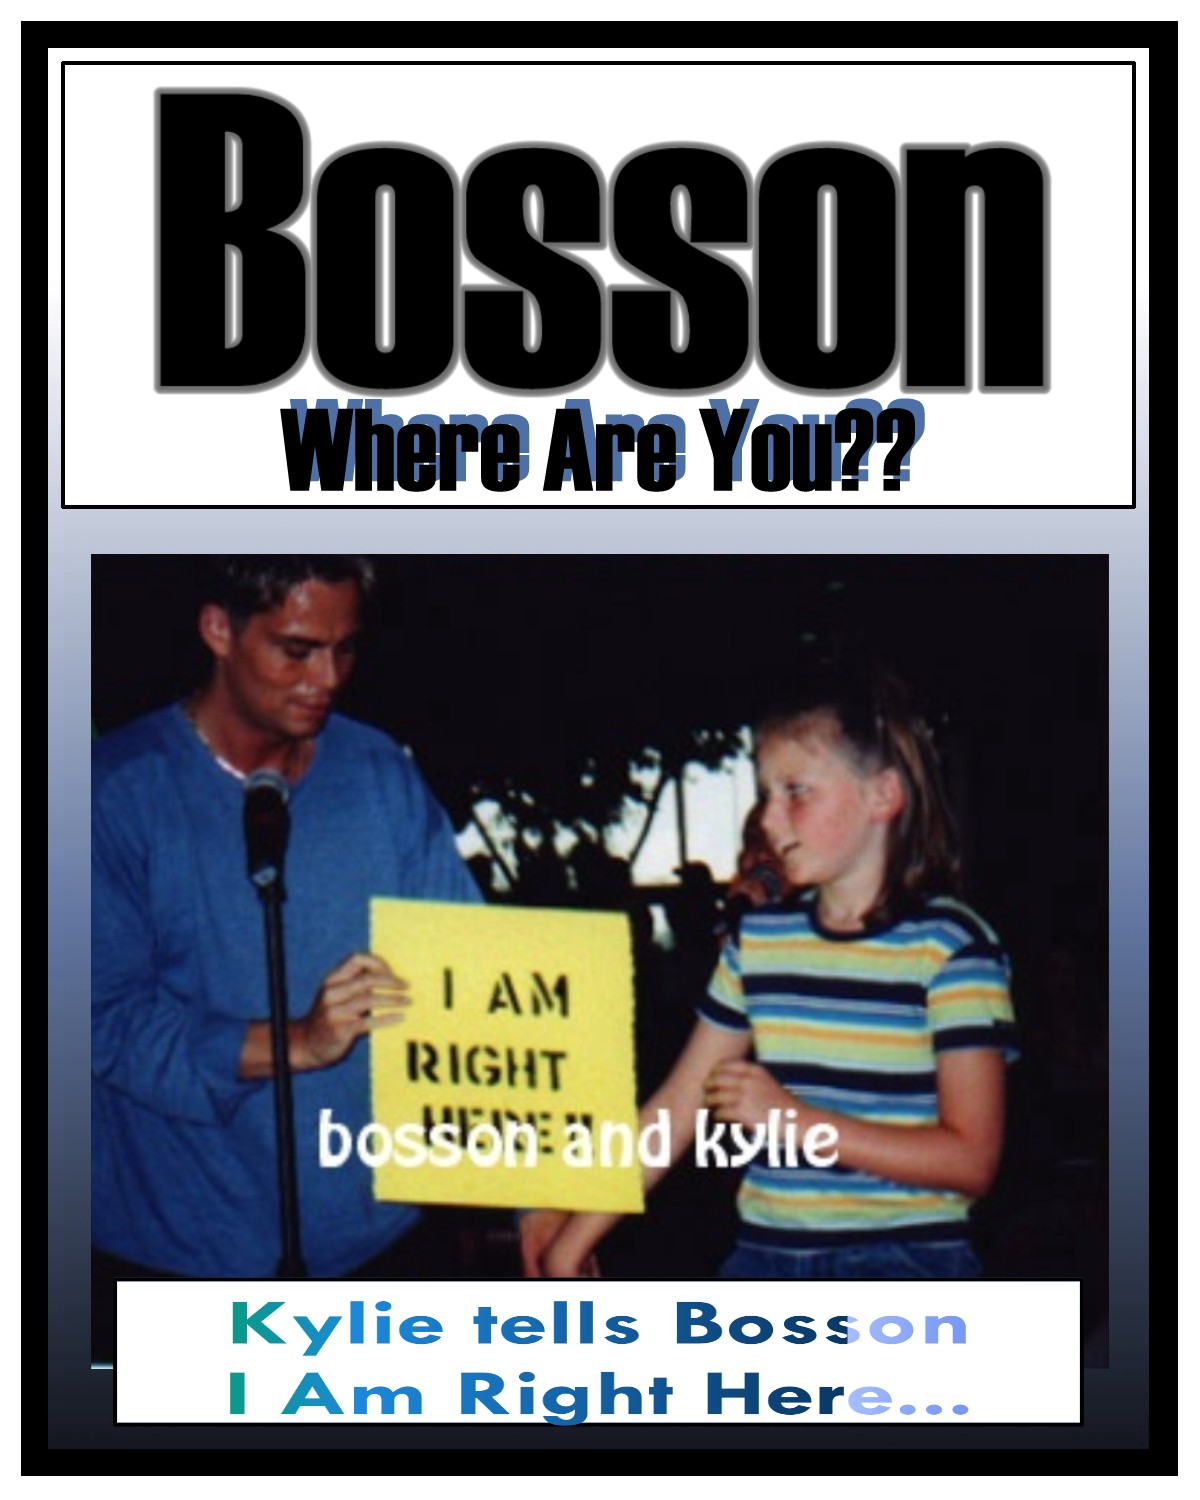 Ky lets Bosson know, she's right here...=)